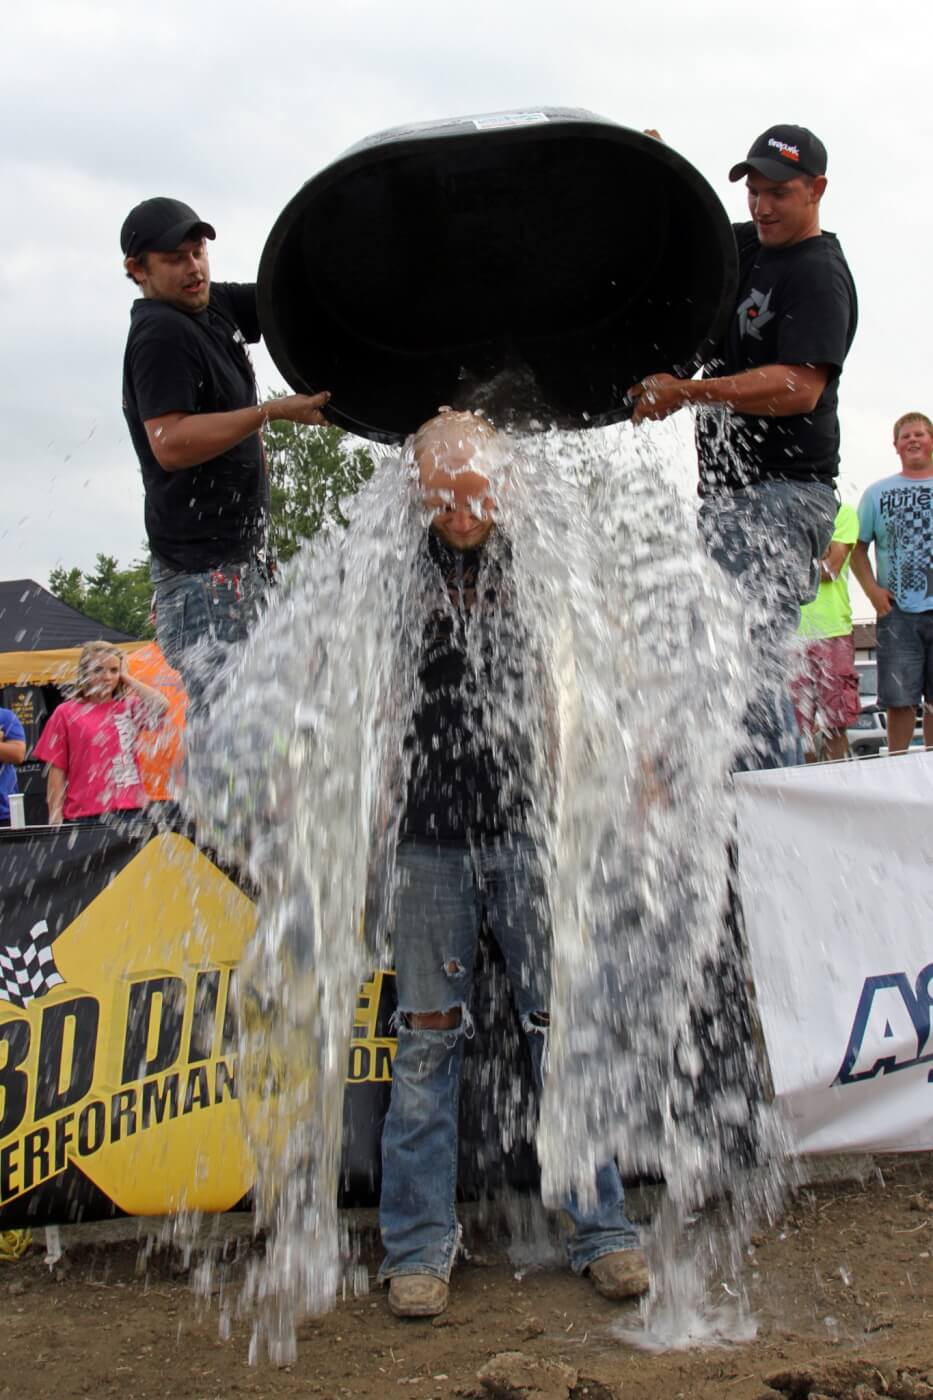 During one of the track grooming intermissions between rounds this guy volunteered to take an “Ice Bucket Challenge” to win one of several giveaway prizes the Firepunk crew had on hand.